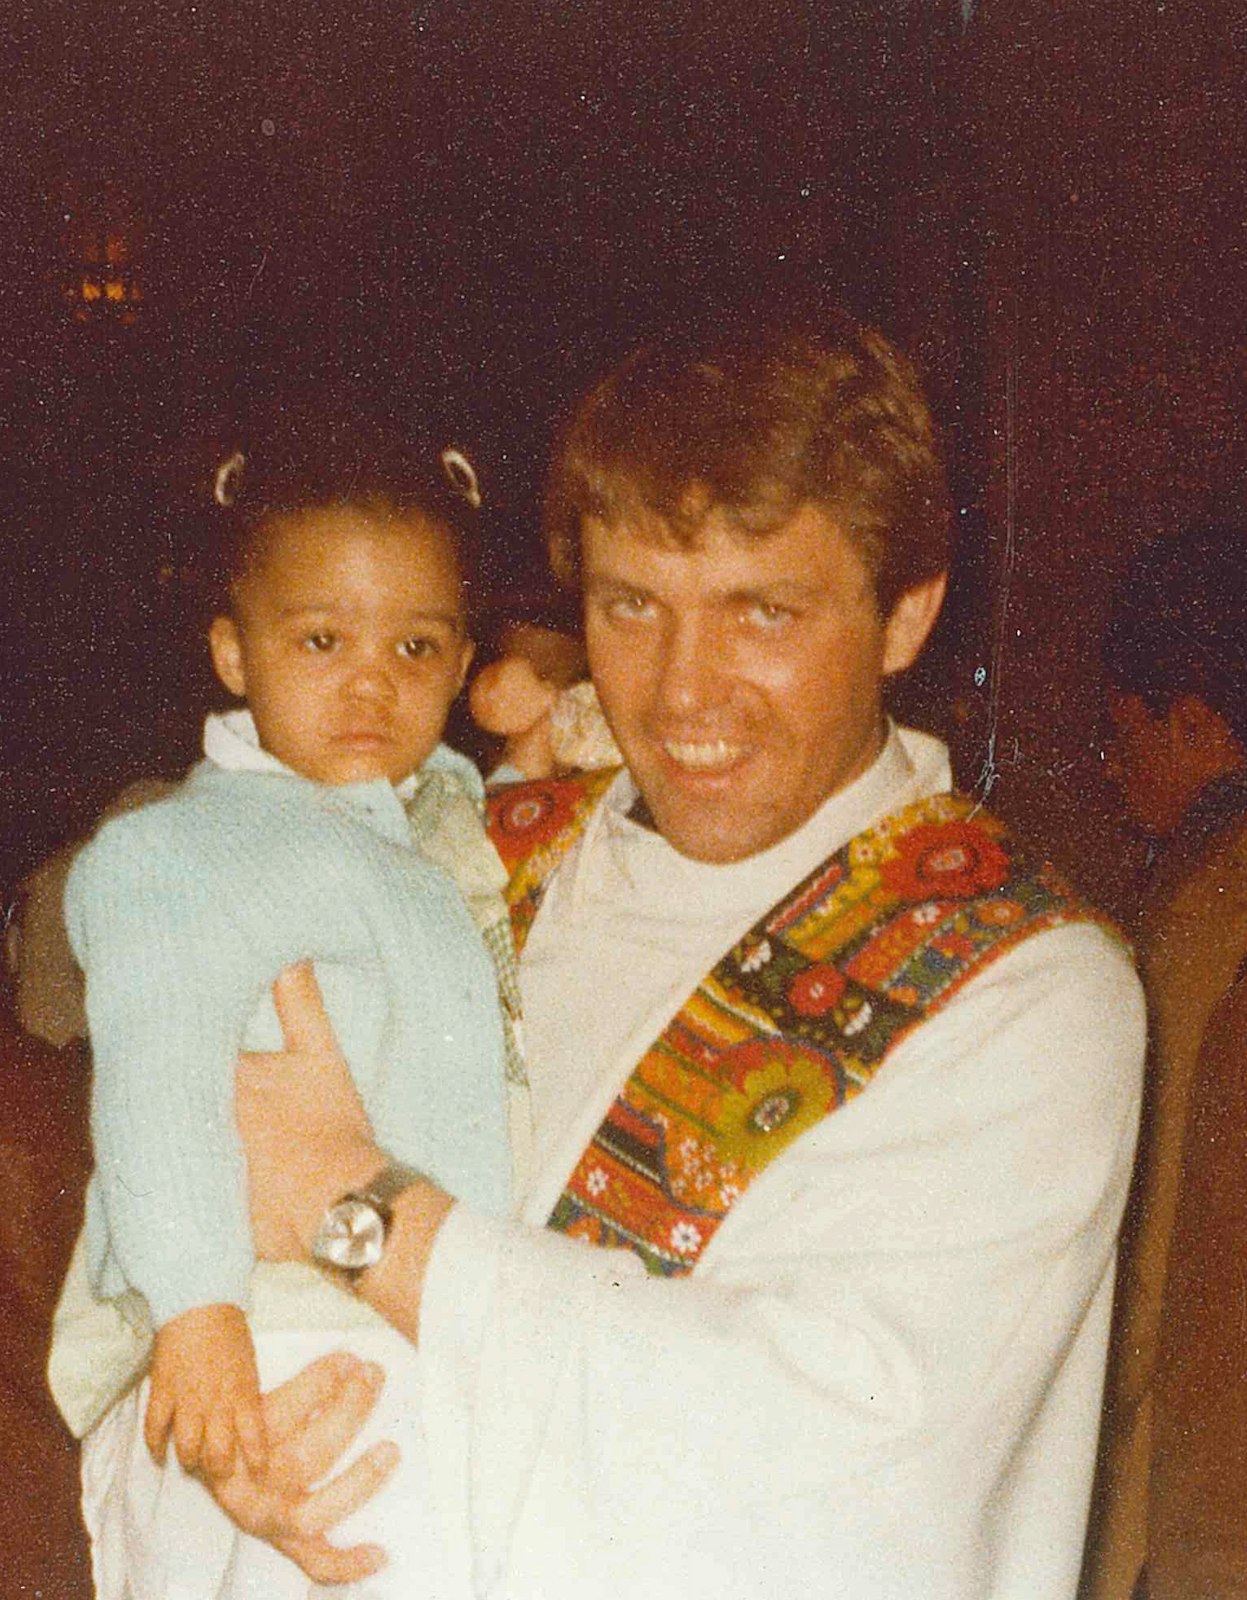 Fr. Donald Hanchon, shortly after his ordination, holds a child at the Cathedral of the Most Blessed Sacrament, his first assignment as a priest. (Detroit Catholic file photo)